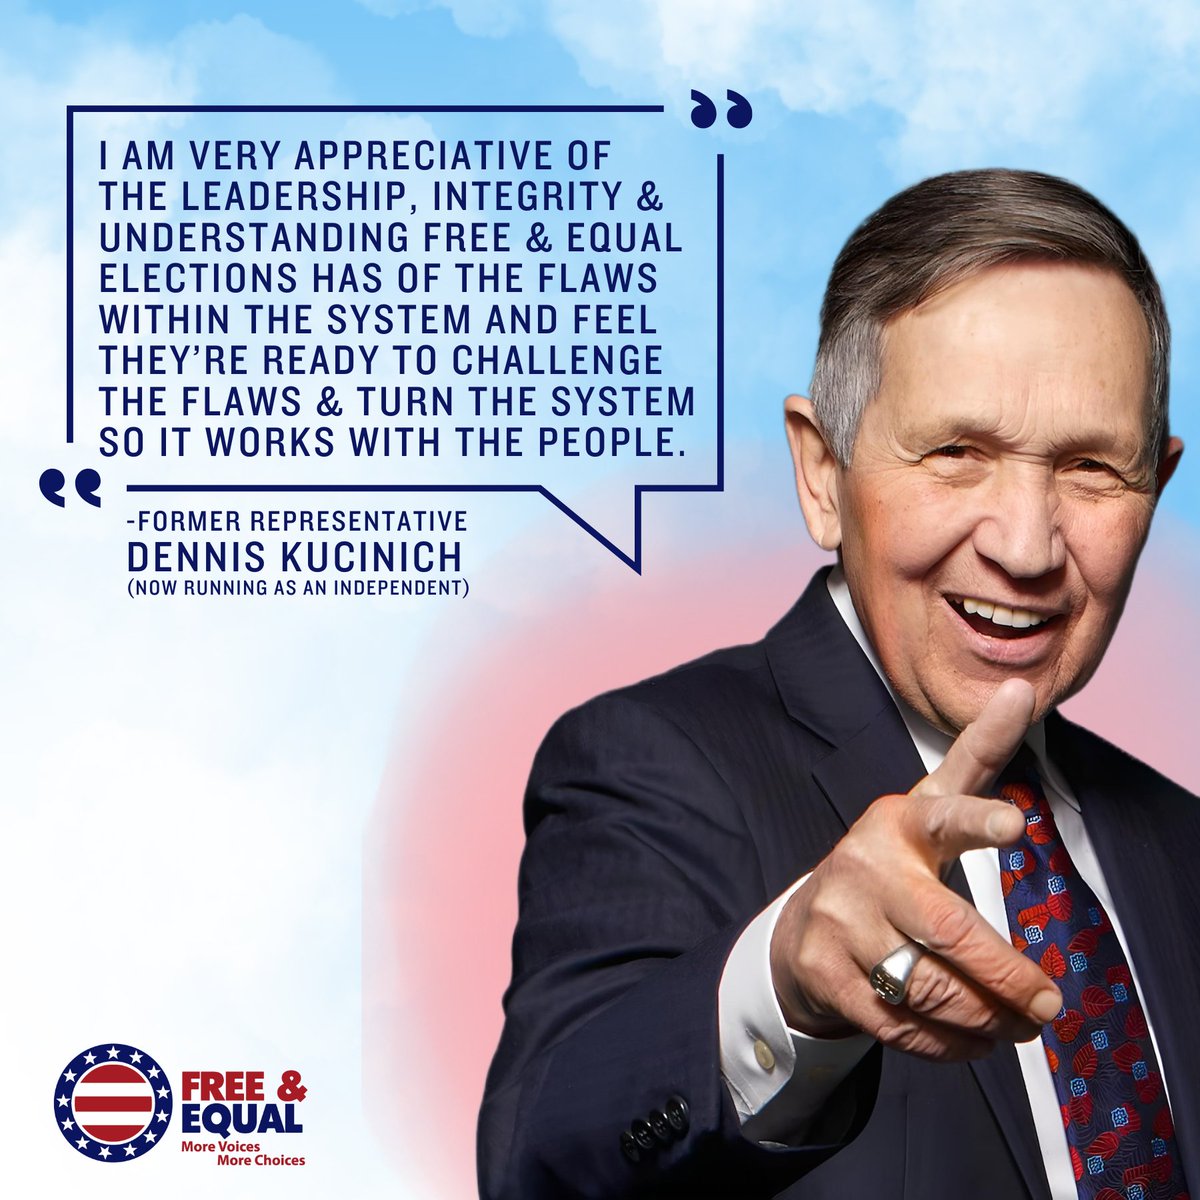 🌟 Exciting news! @Dennis_kucinich, a true advocate for equal elections, is now running as an independent for Congress. His dedication to freedom and democracy continues to shine!  🗳🤝 

#DennisKucinich #FreeAndEqual 
#IndependentVoice #UnitedWeStand